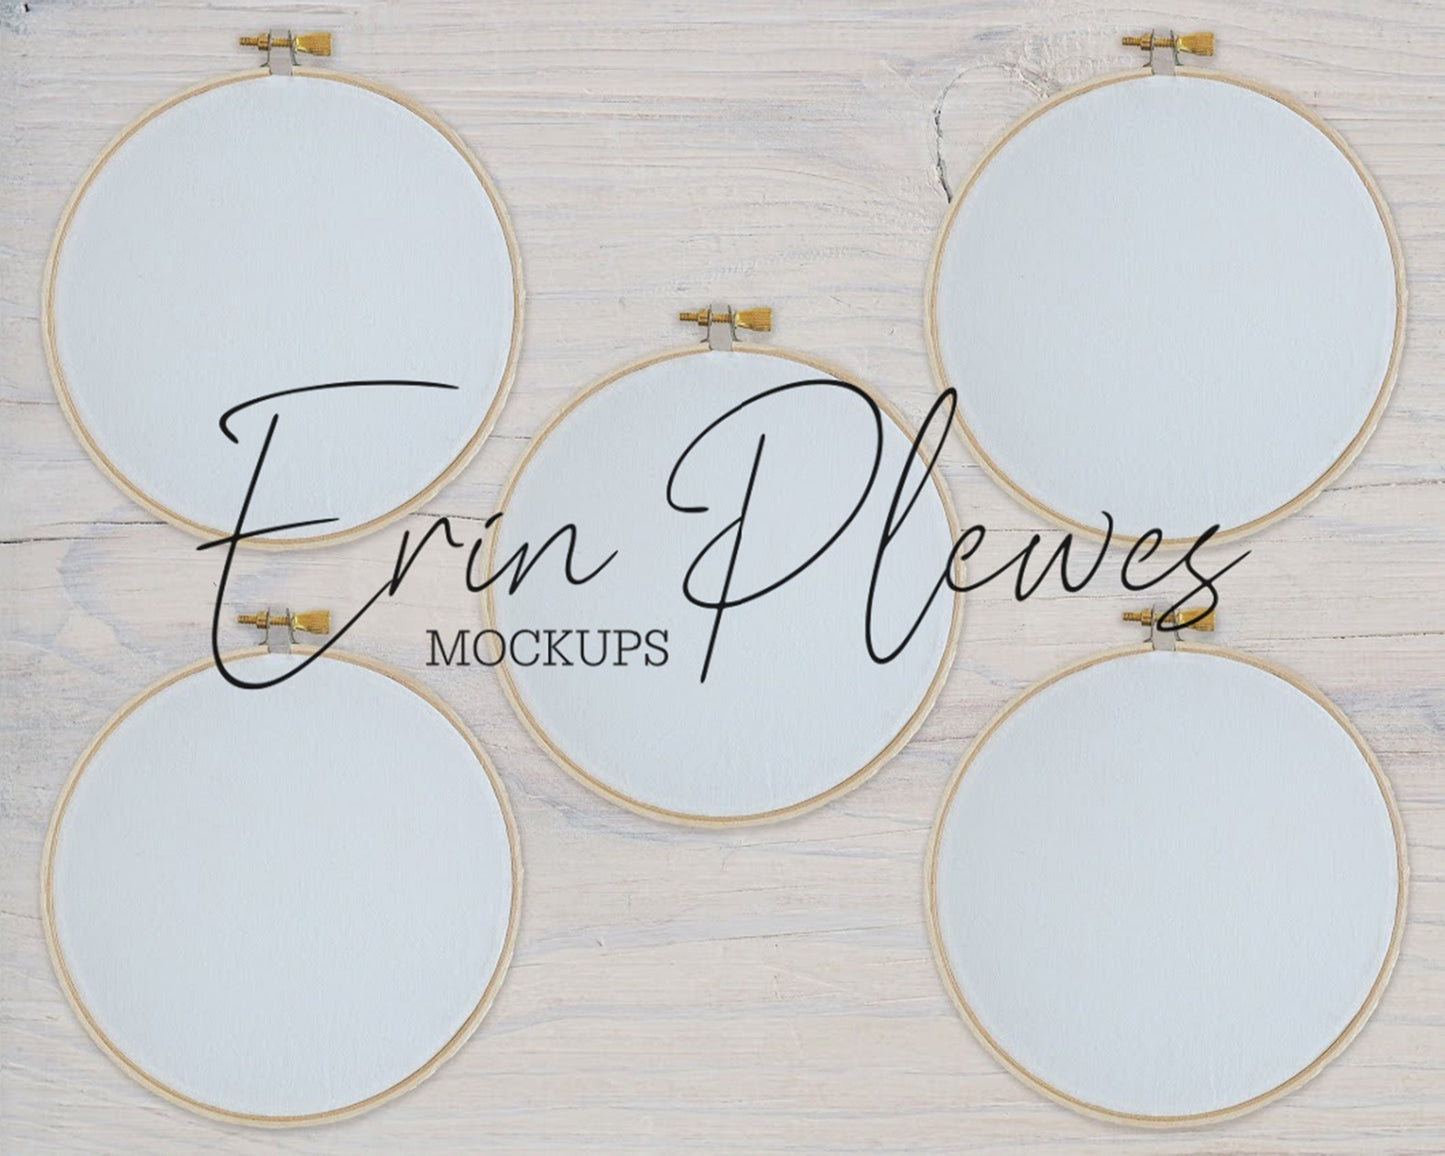 Embroidery Hoop Mockup Set of 5, Cross Stich Mock-Up on Rustic White Wood, PSD Smart Object Digital Download Template JPG PNG